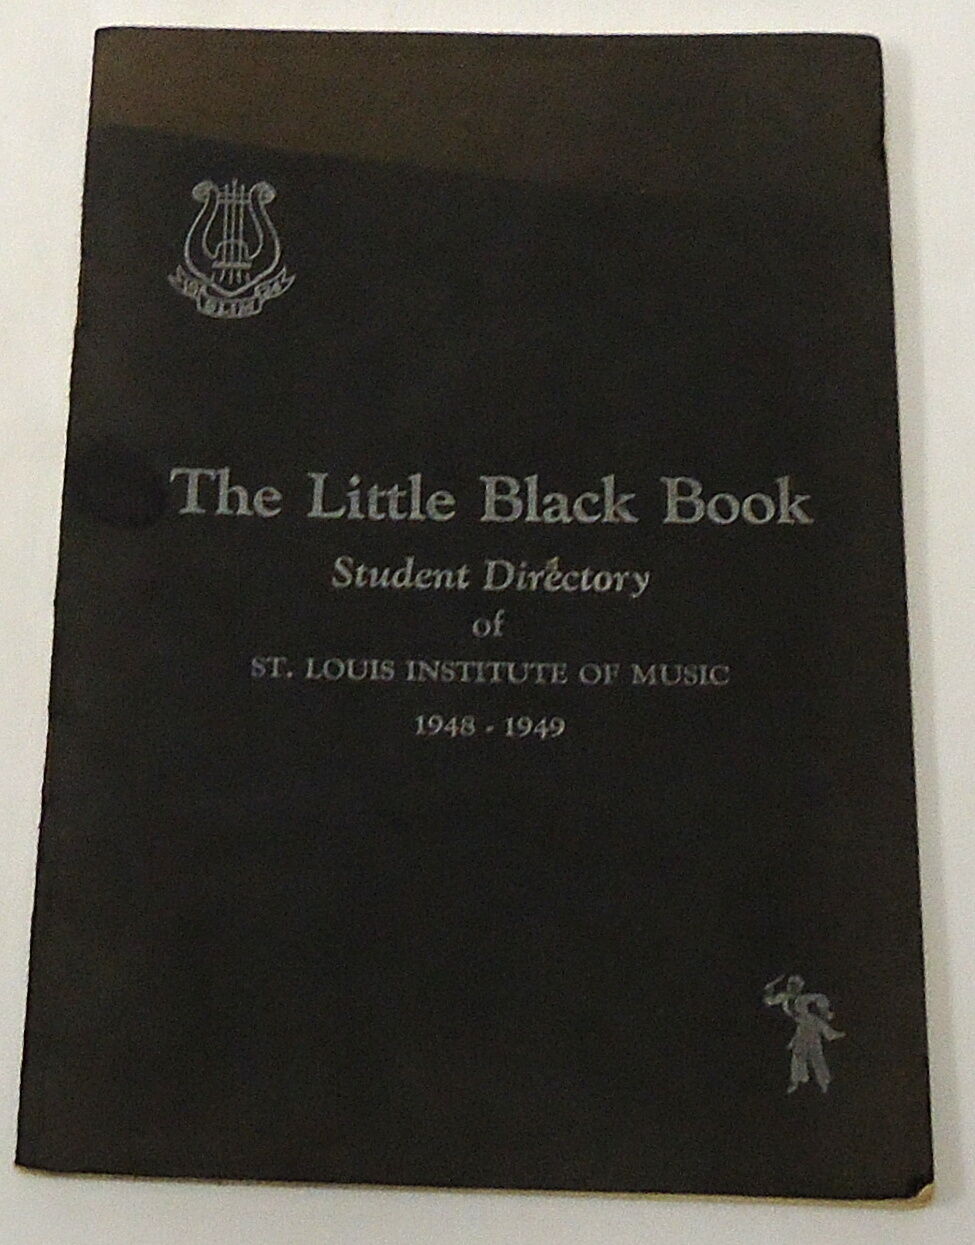 Little Black Book, Student Directory of ST. LOUIS INSTITUTE OF MUSIC, 1948-1949